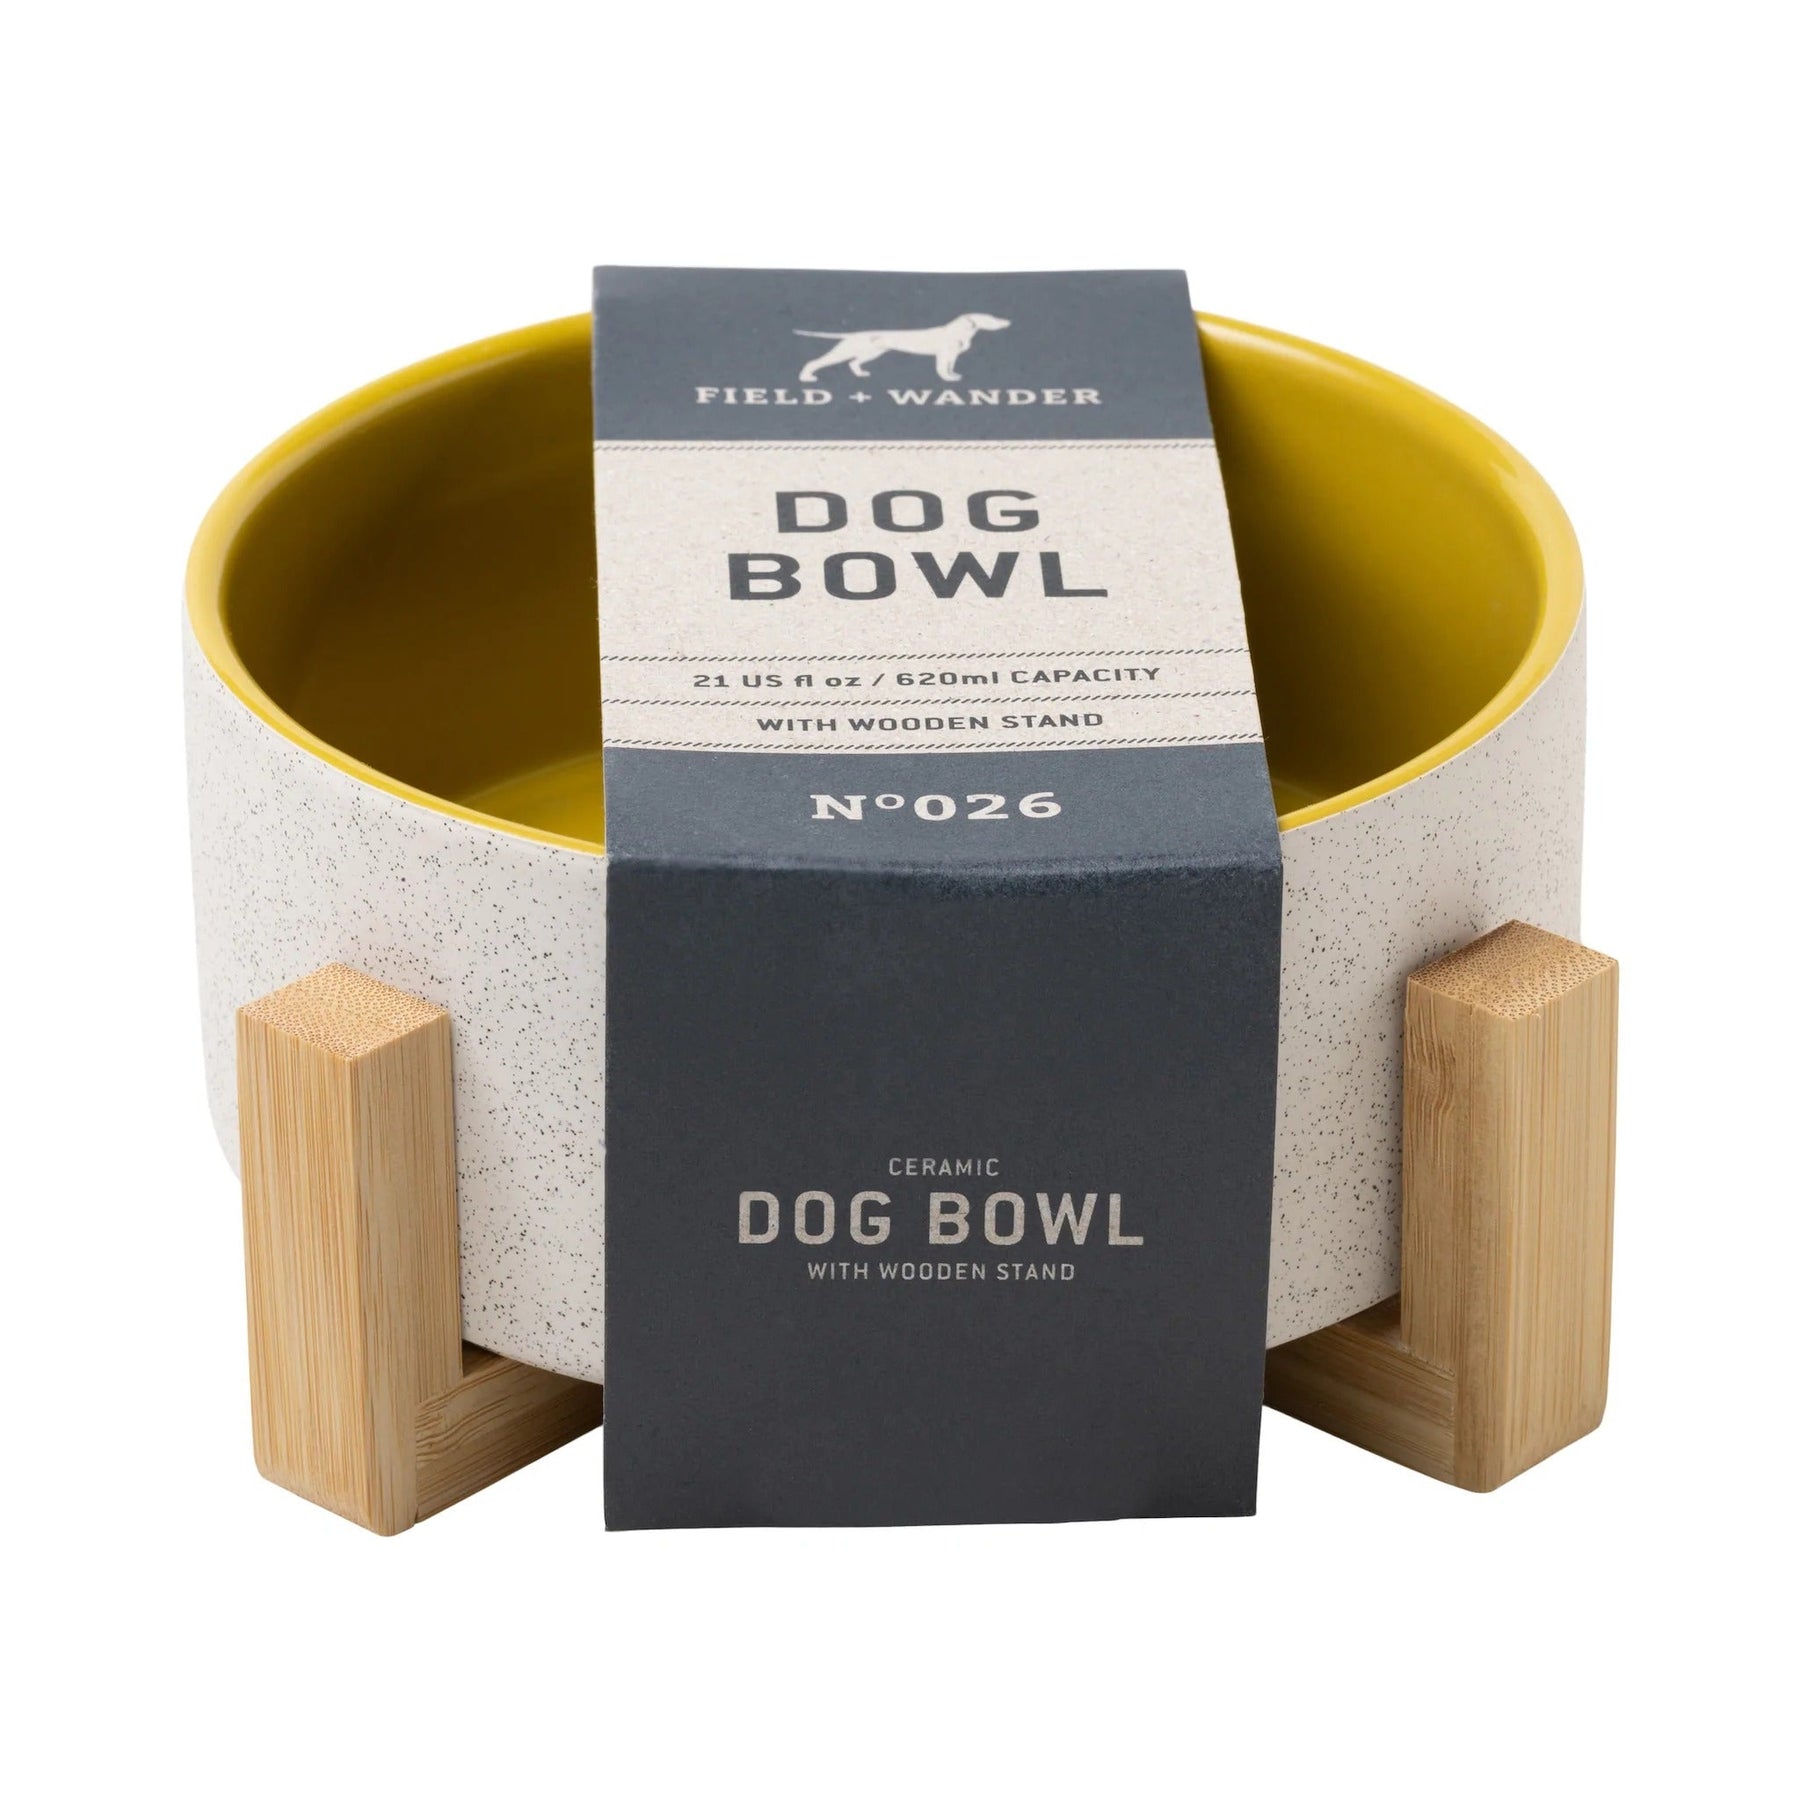 Field and Wander Dog Bowl with Wooden Stand - Yellow